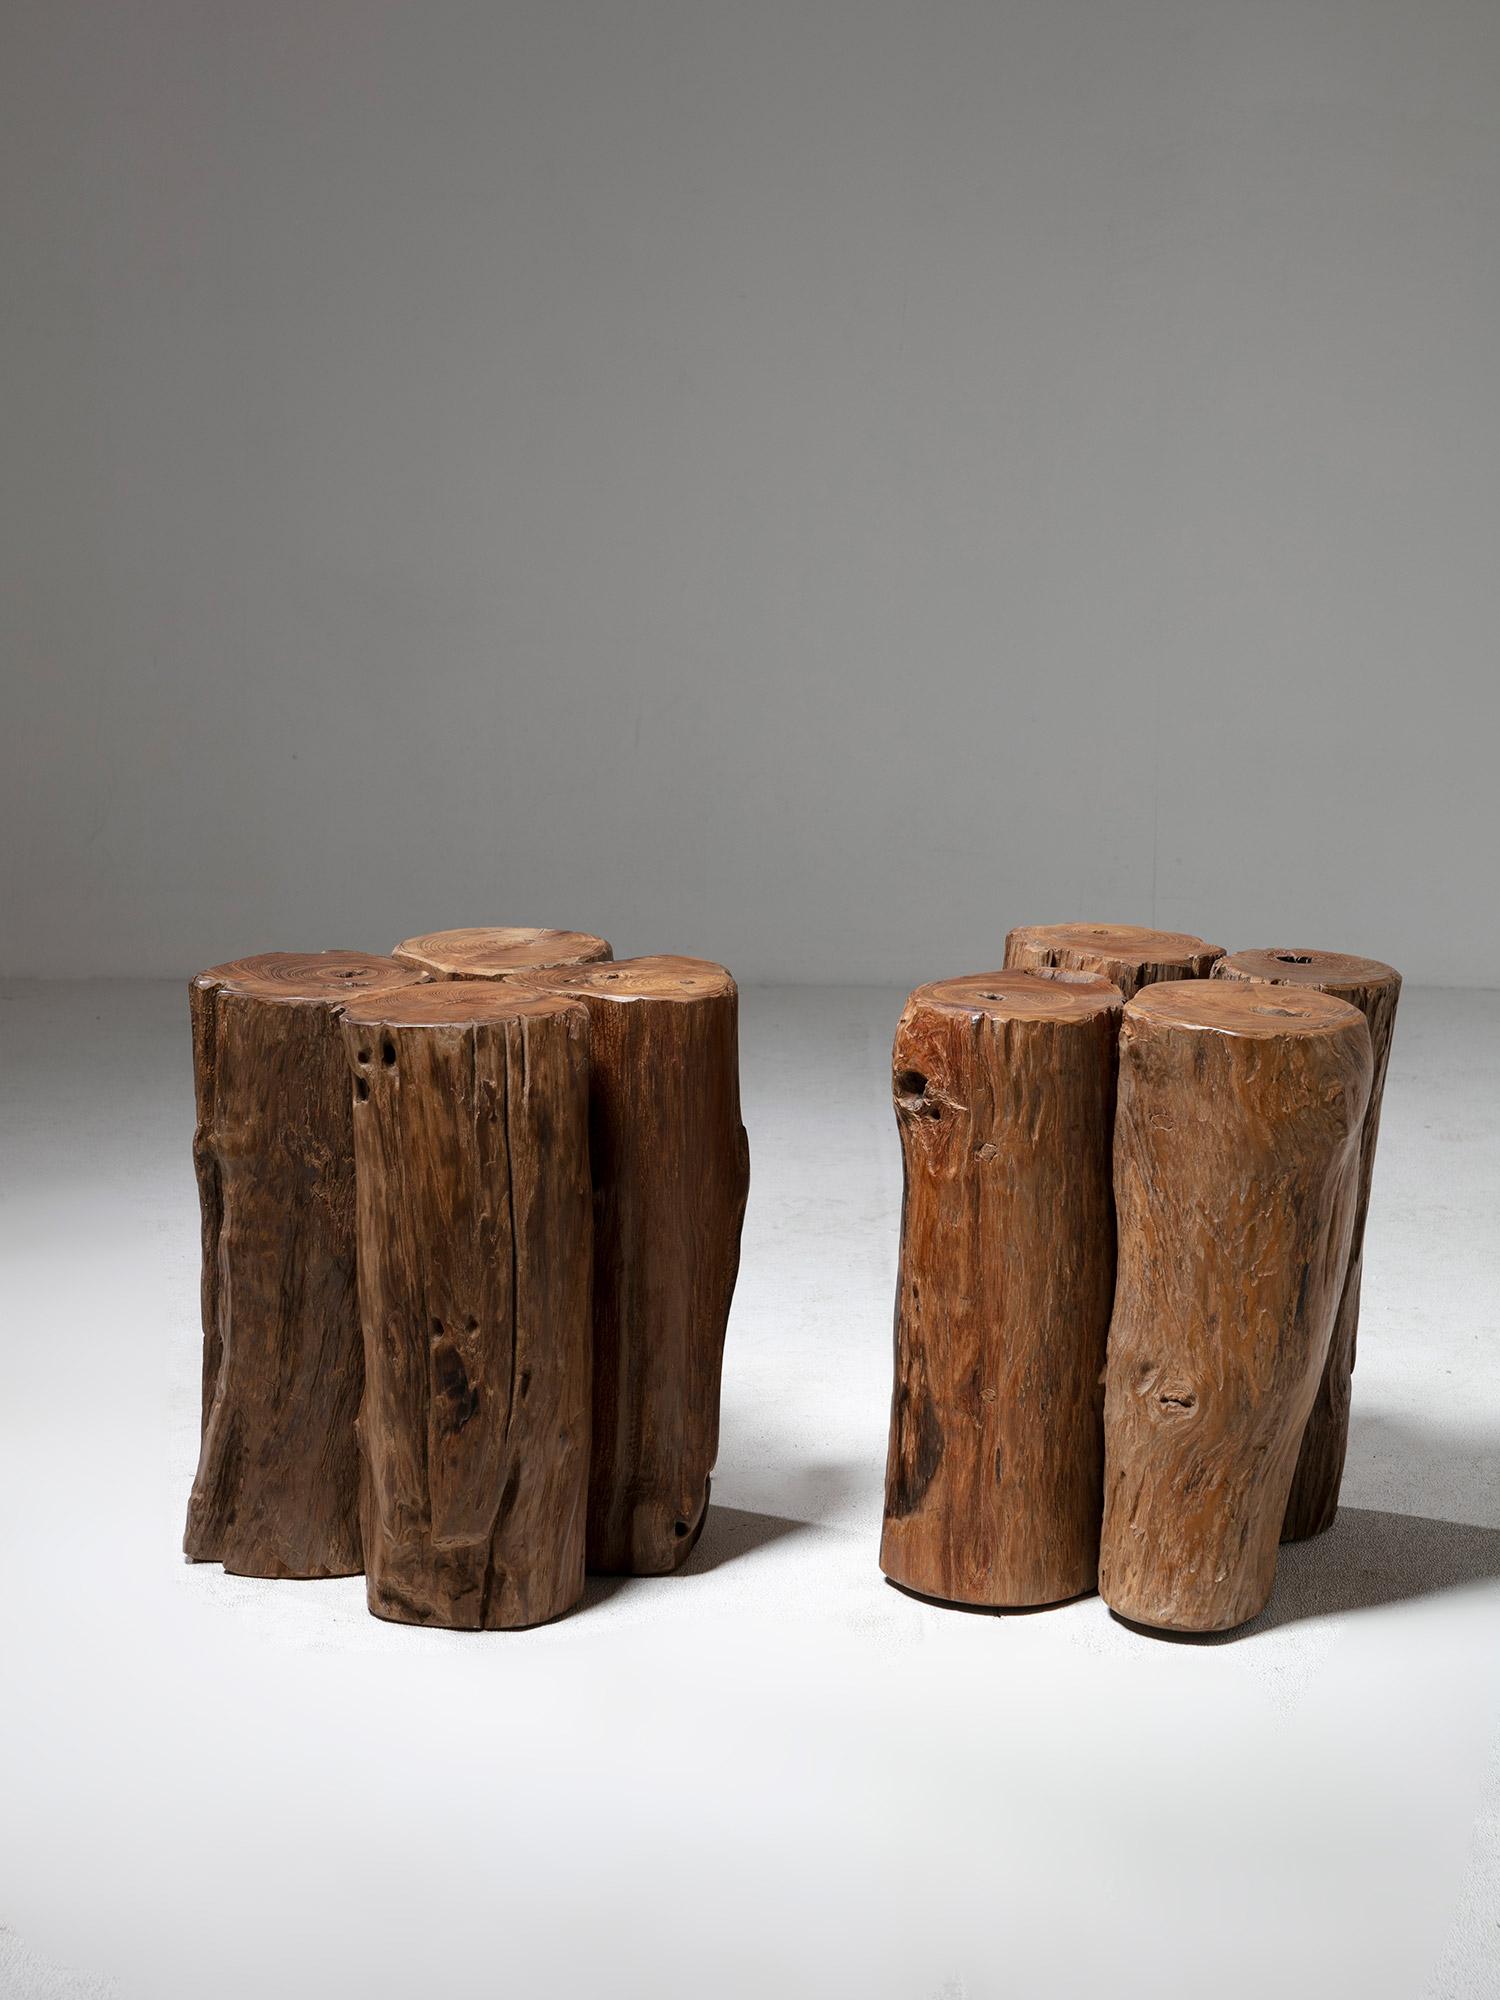 Pair of 60s stools composed by chunks of logs connected together.